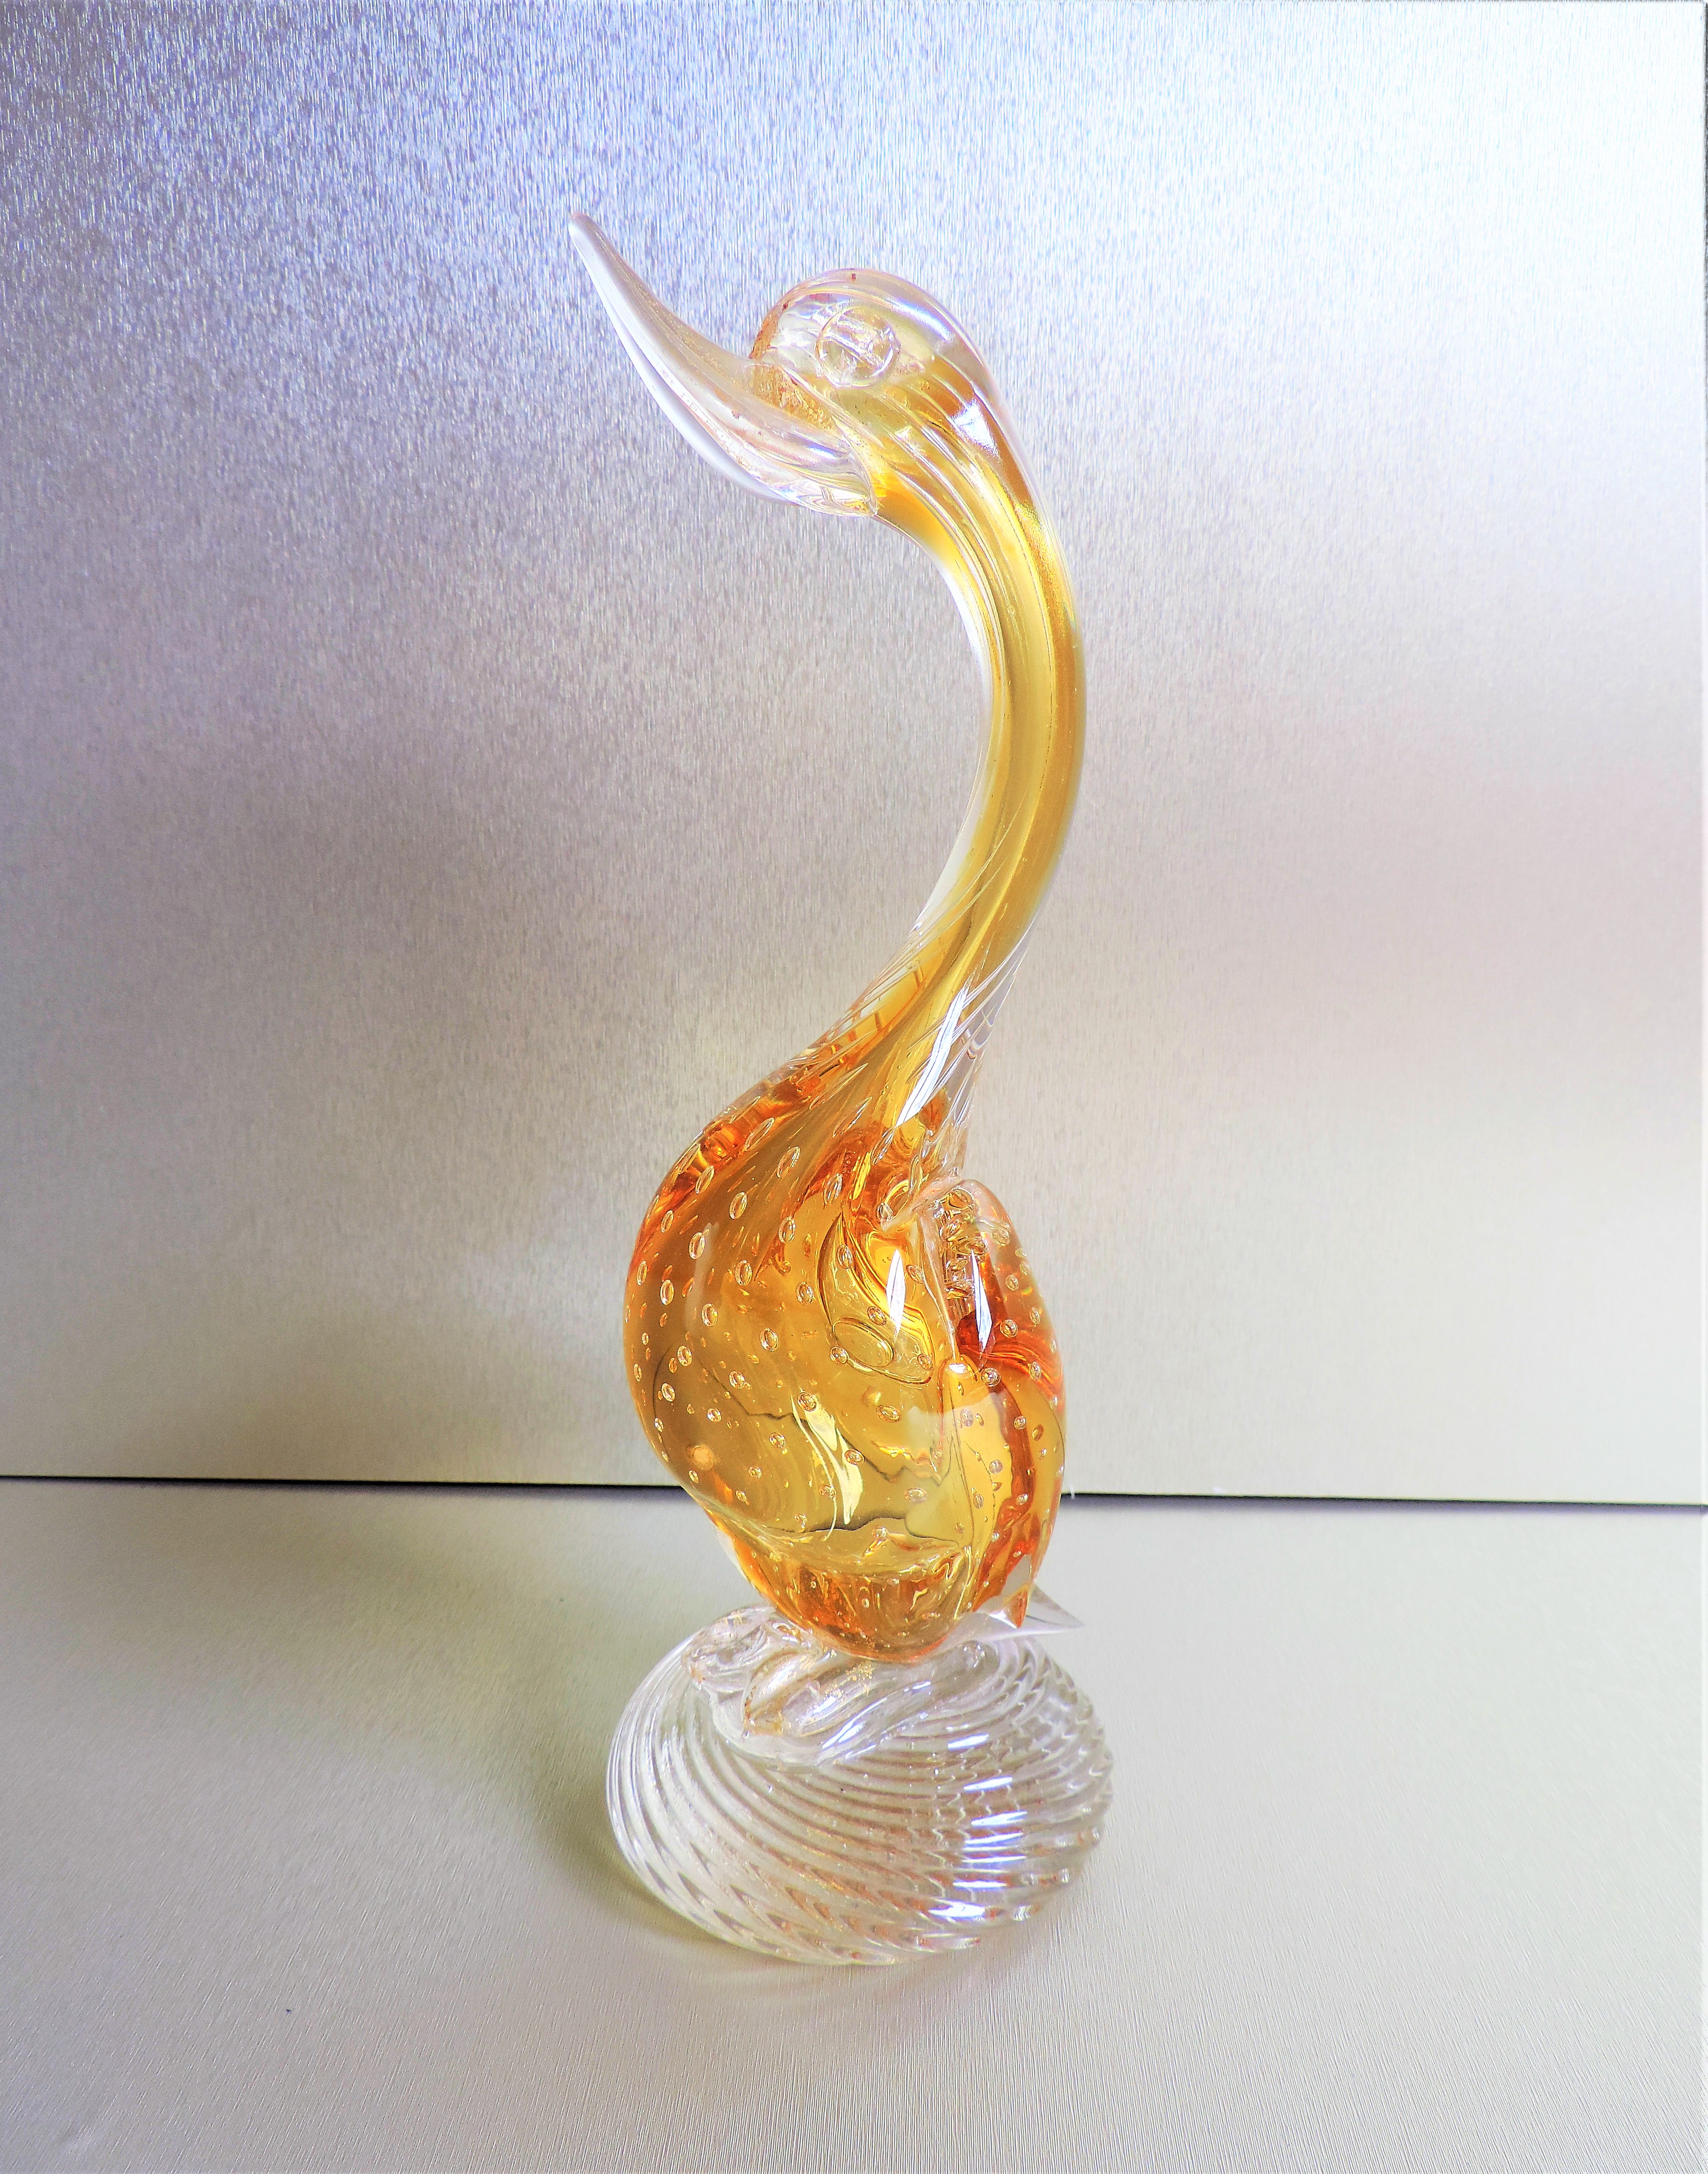 Murano Sommerso Amber Bullicante Glass Sculpture 27cm High - Image 2 of 4